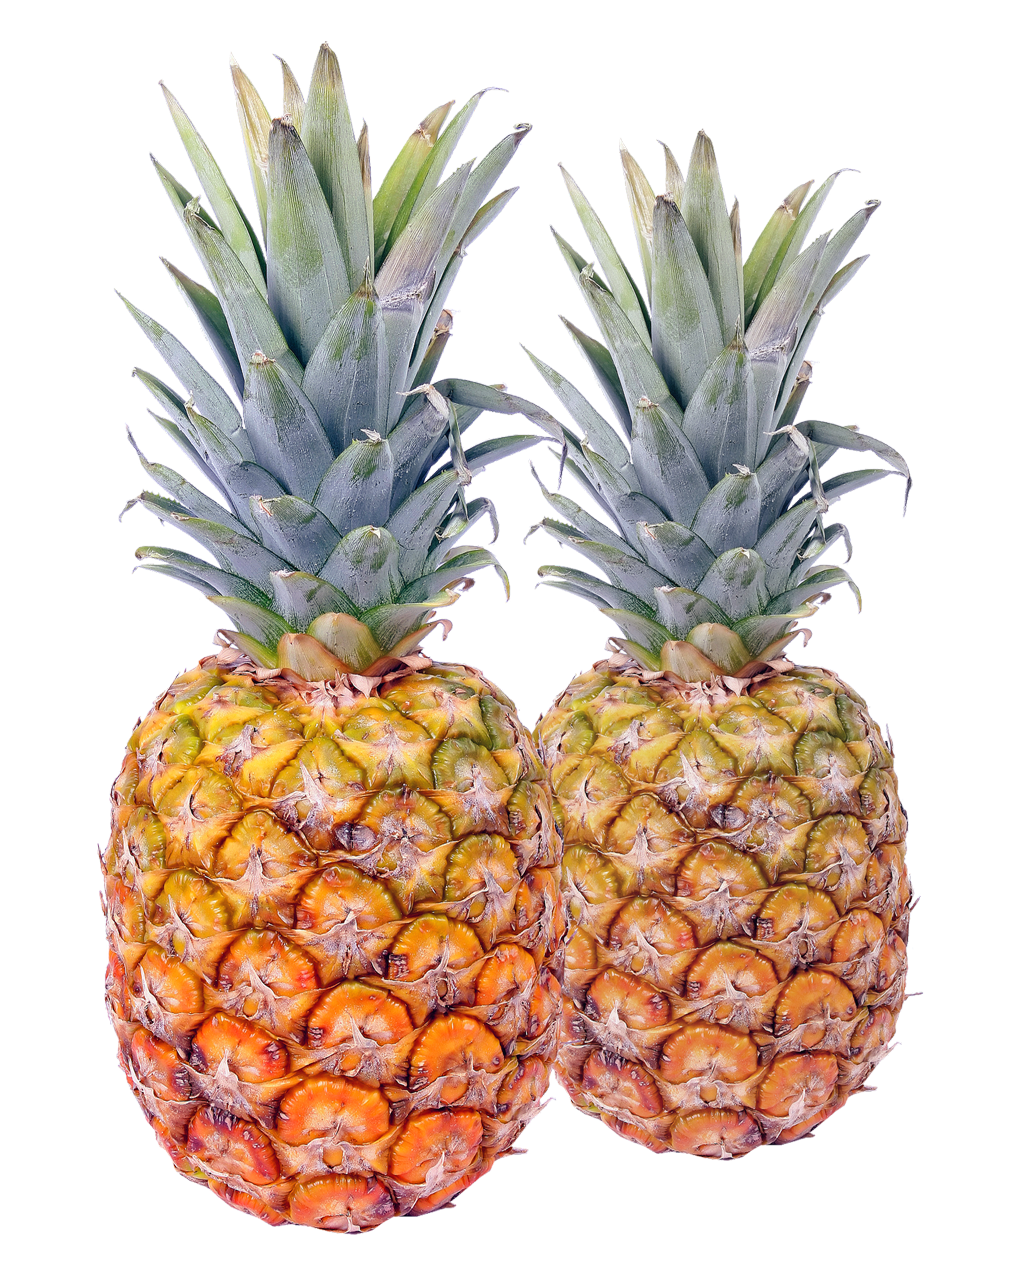 Two Pineapple